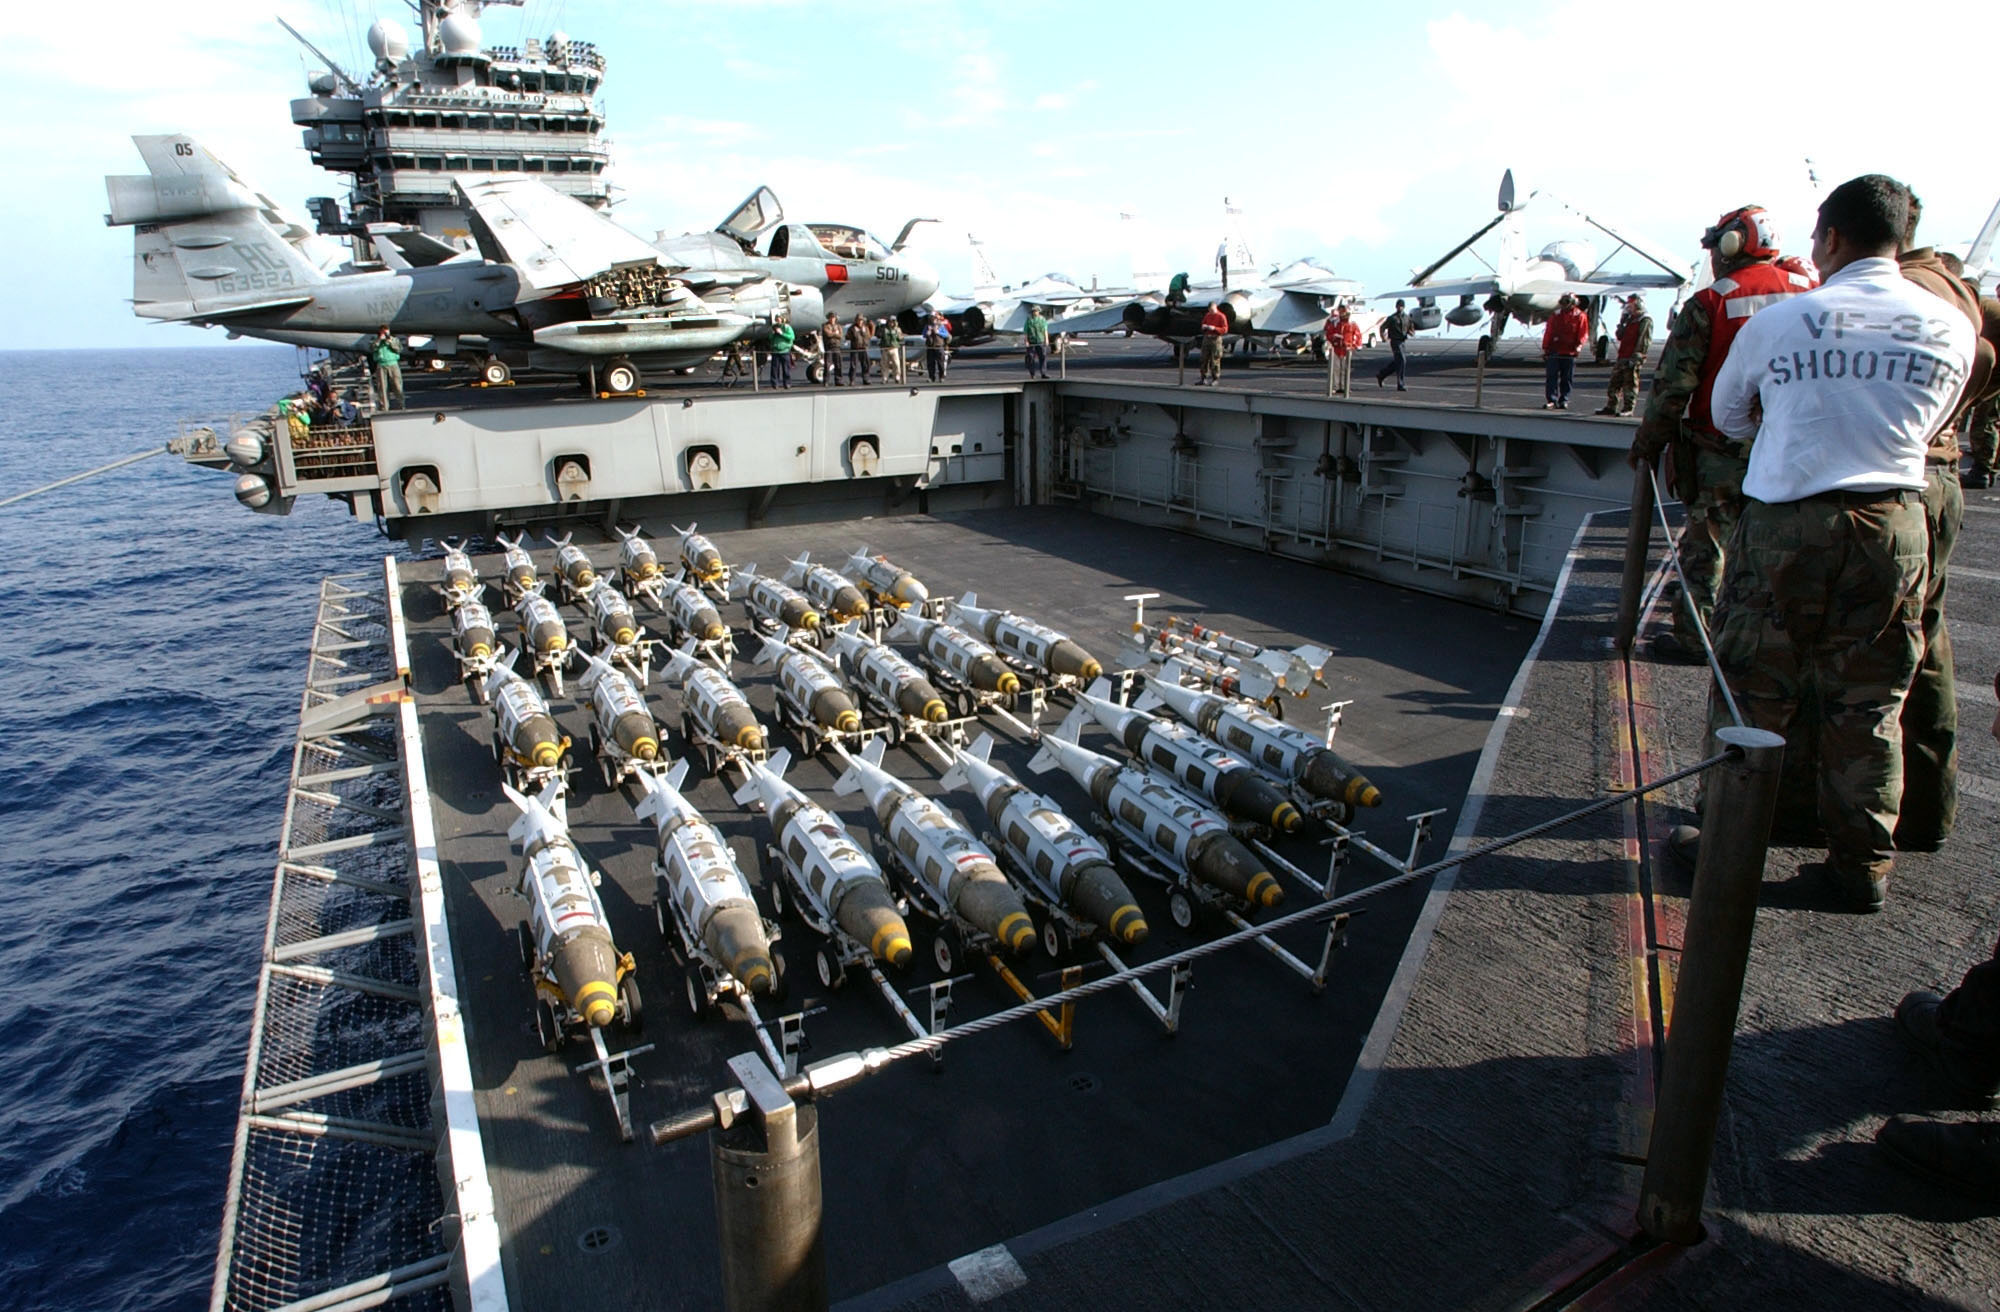 US_Navy_030321-N-31_Joint_Direct_Attack_Munitions_(JDAM)_are_transported_to_the_flight_deck.jpg